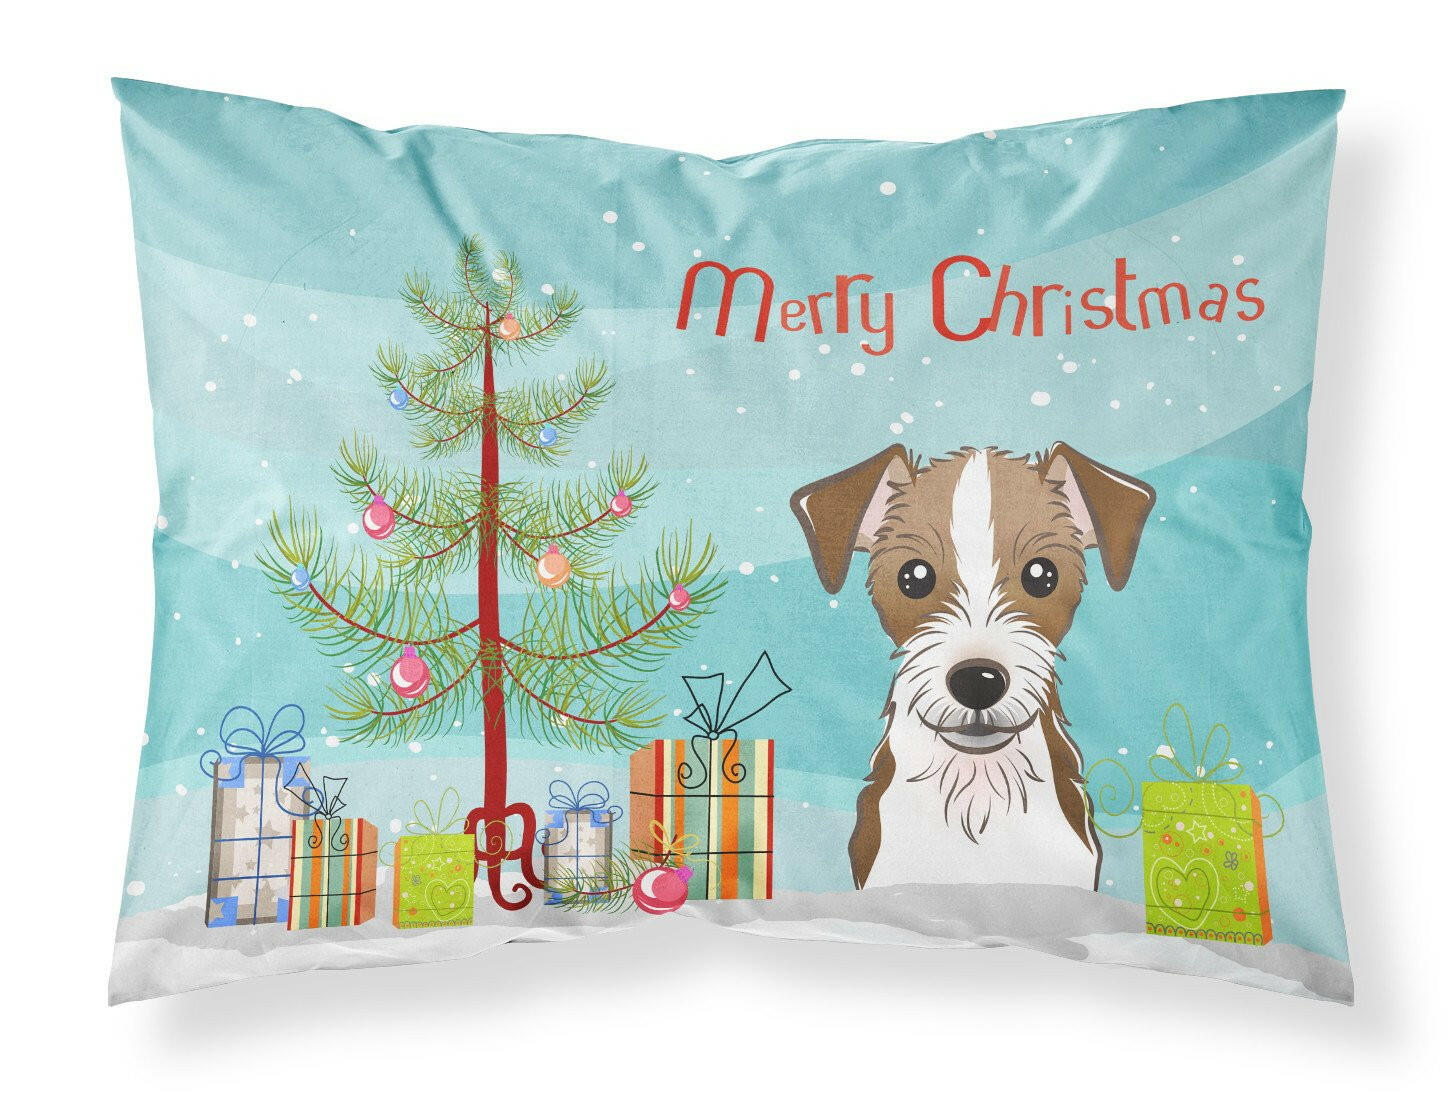 Christmas Tree and Jack Russell Terrier Fabric Standard Pillowcase BB1574PILLOWCASE by Caroline's Treasures